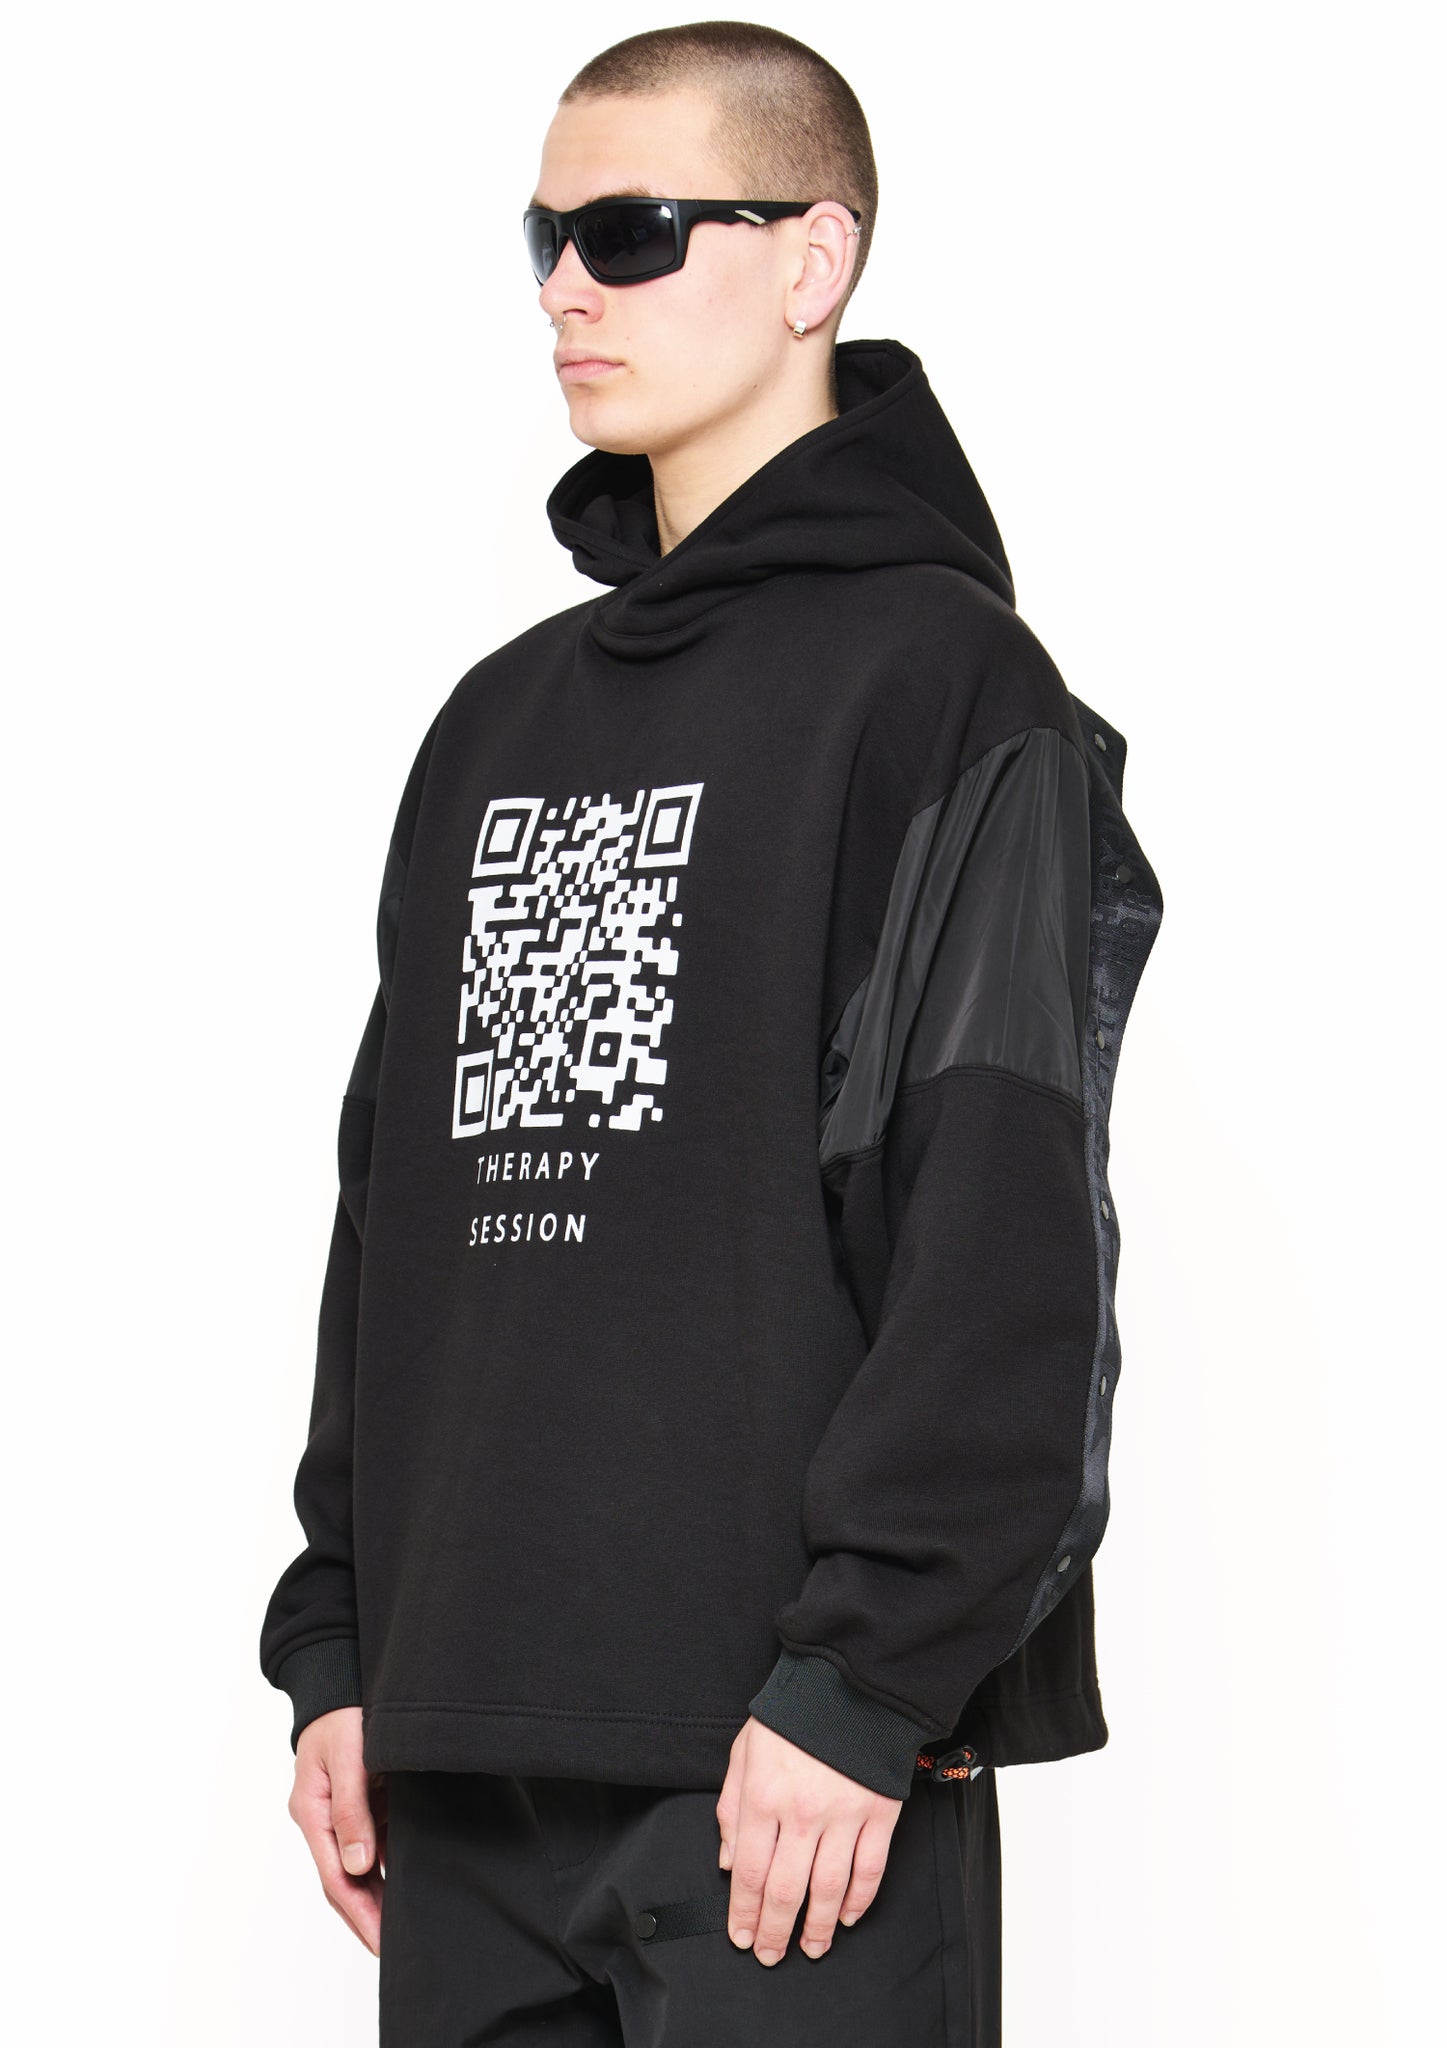 THERAPY HOODY